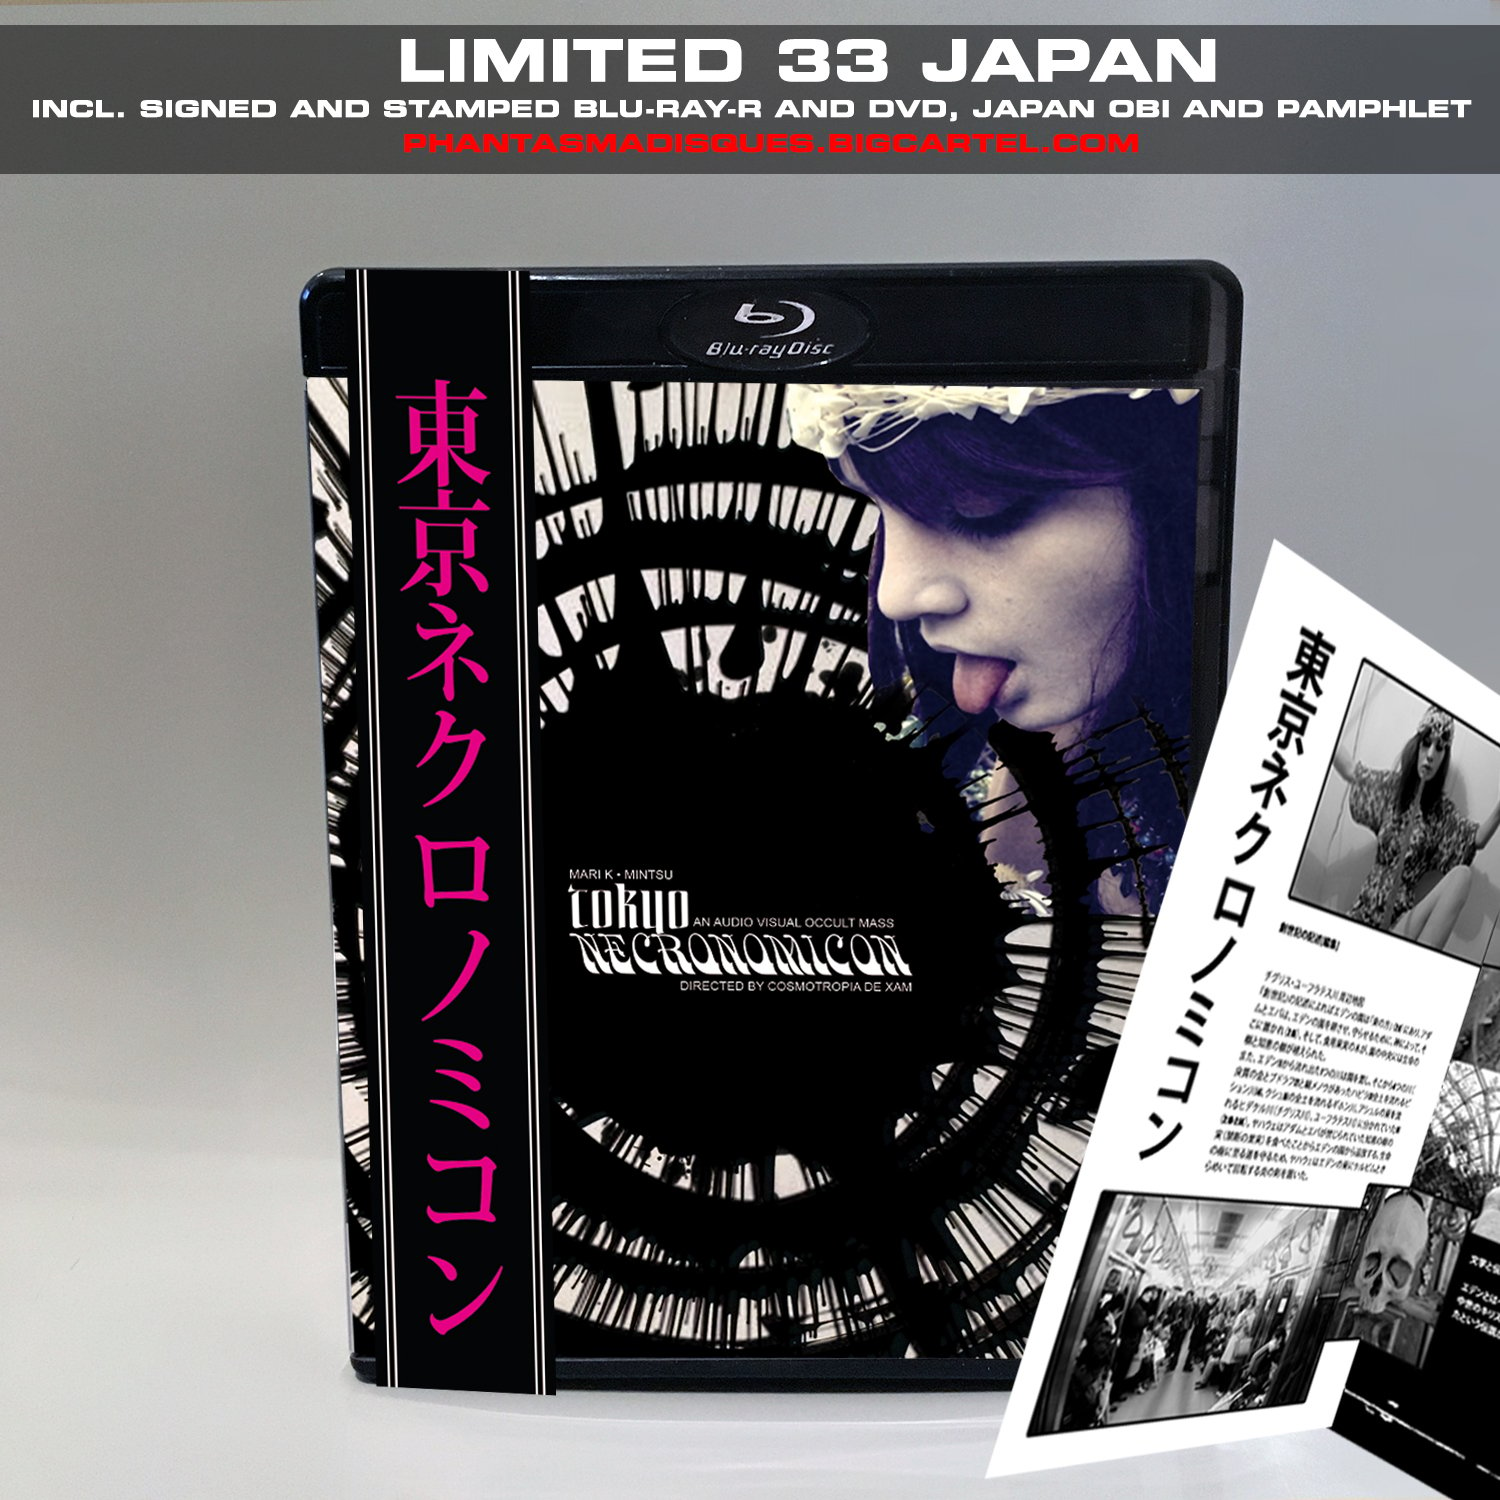 TOKYO NECRONOMICON - LIMITED 33 SIGNED/STAMPED BLU-RAY-R + DVD